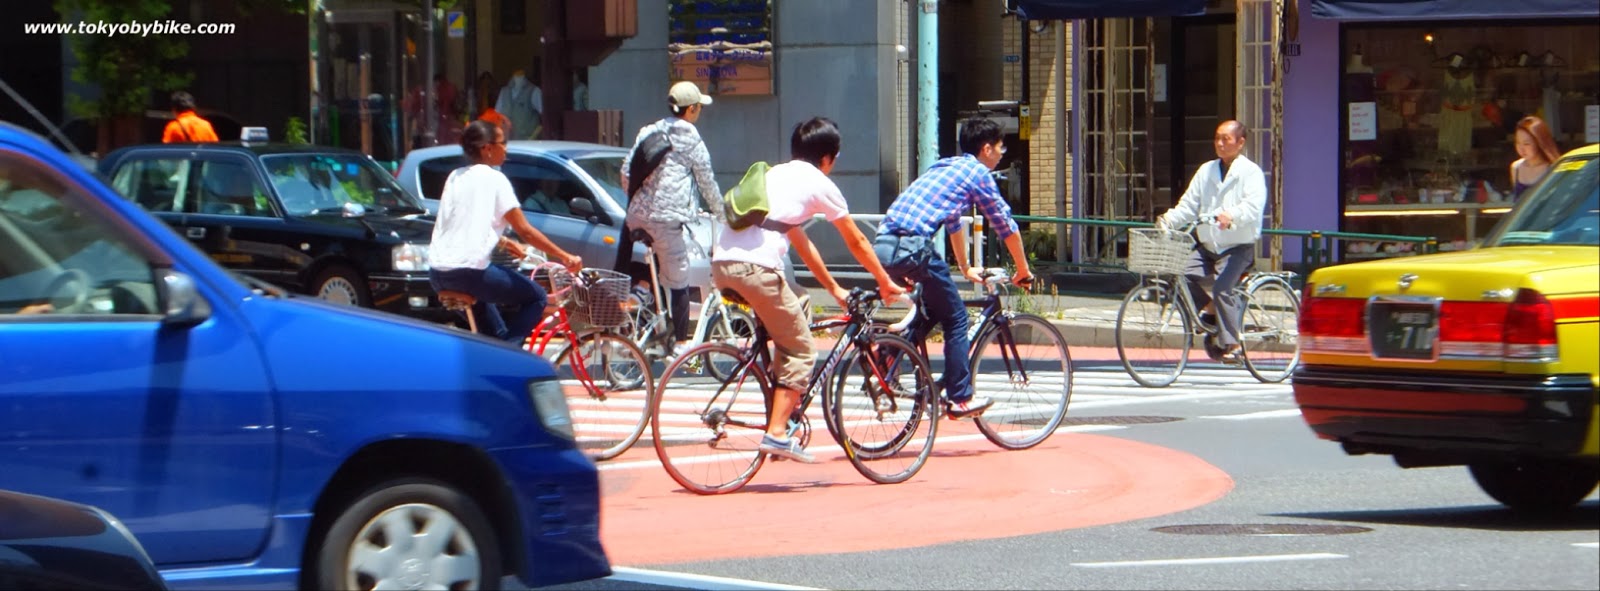 Employer Benefits Of Bicycle Commuting Tokyo Bike Cycling inside Cycling To Work Benefits For Employers